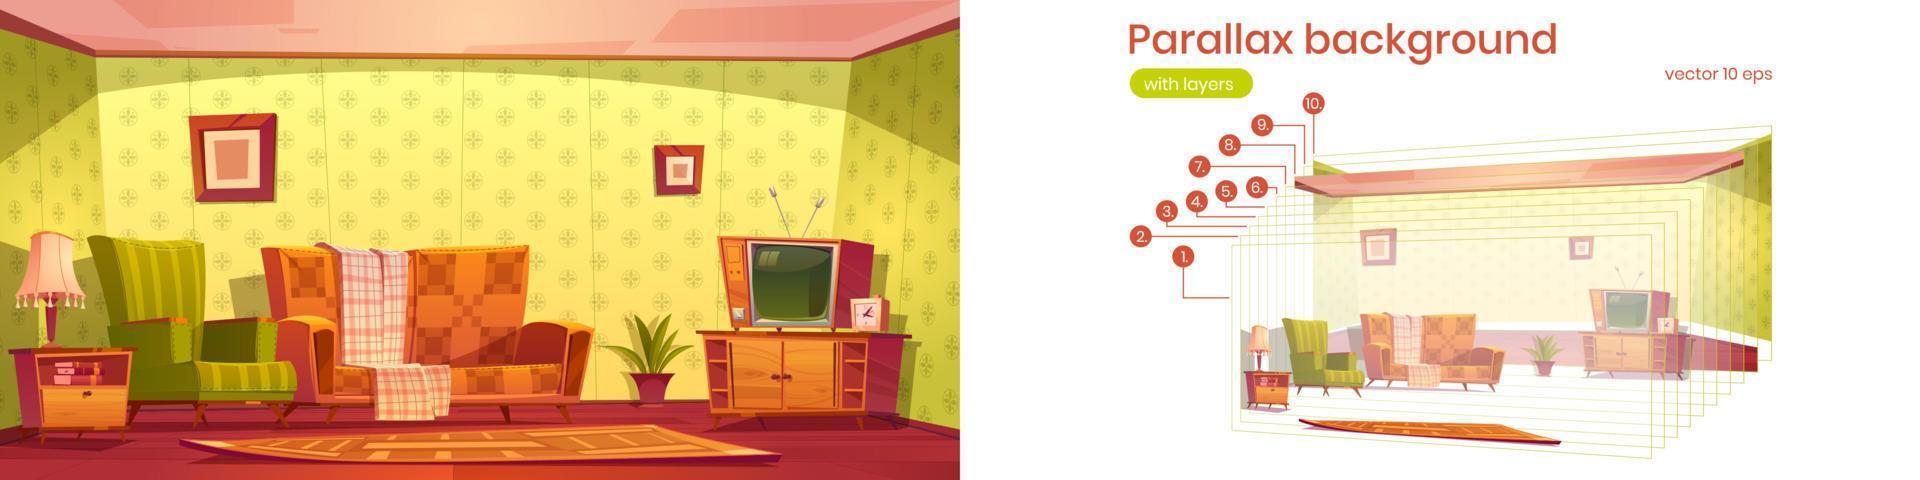 Parallax background for game with vintage room vector